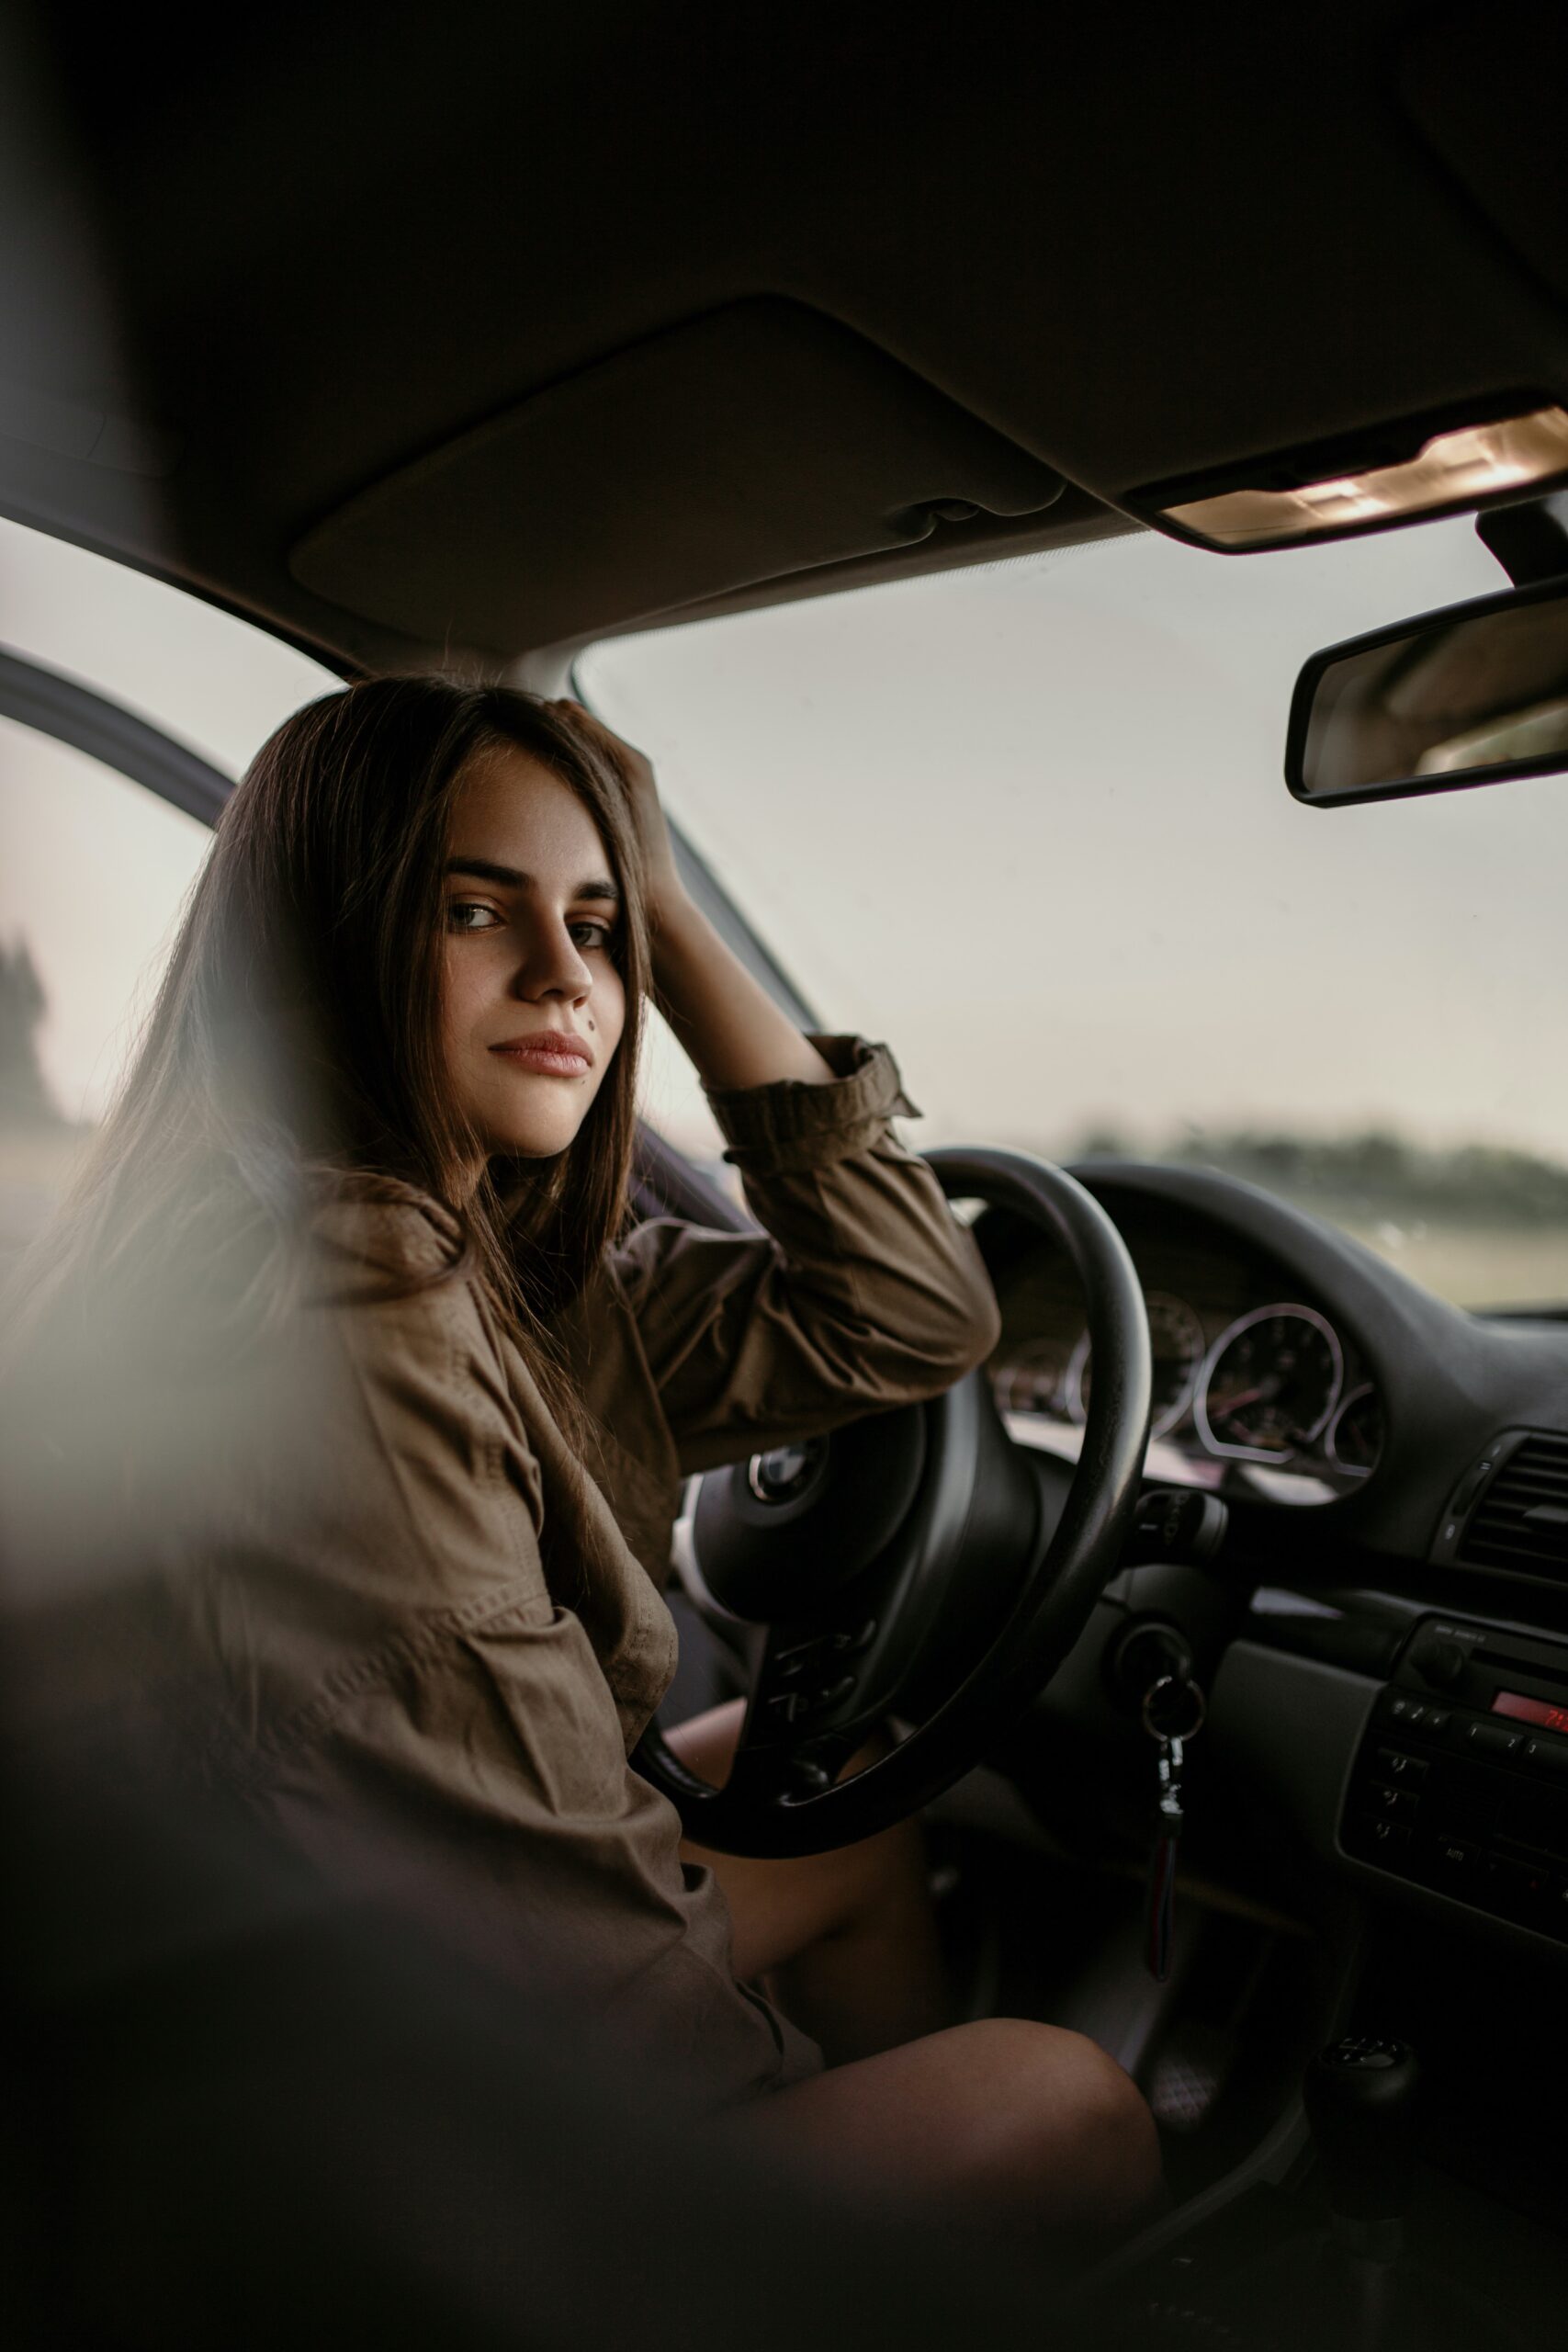 Why Do Teens Pay More for Auto Insurance?